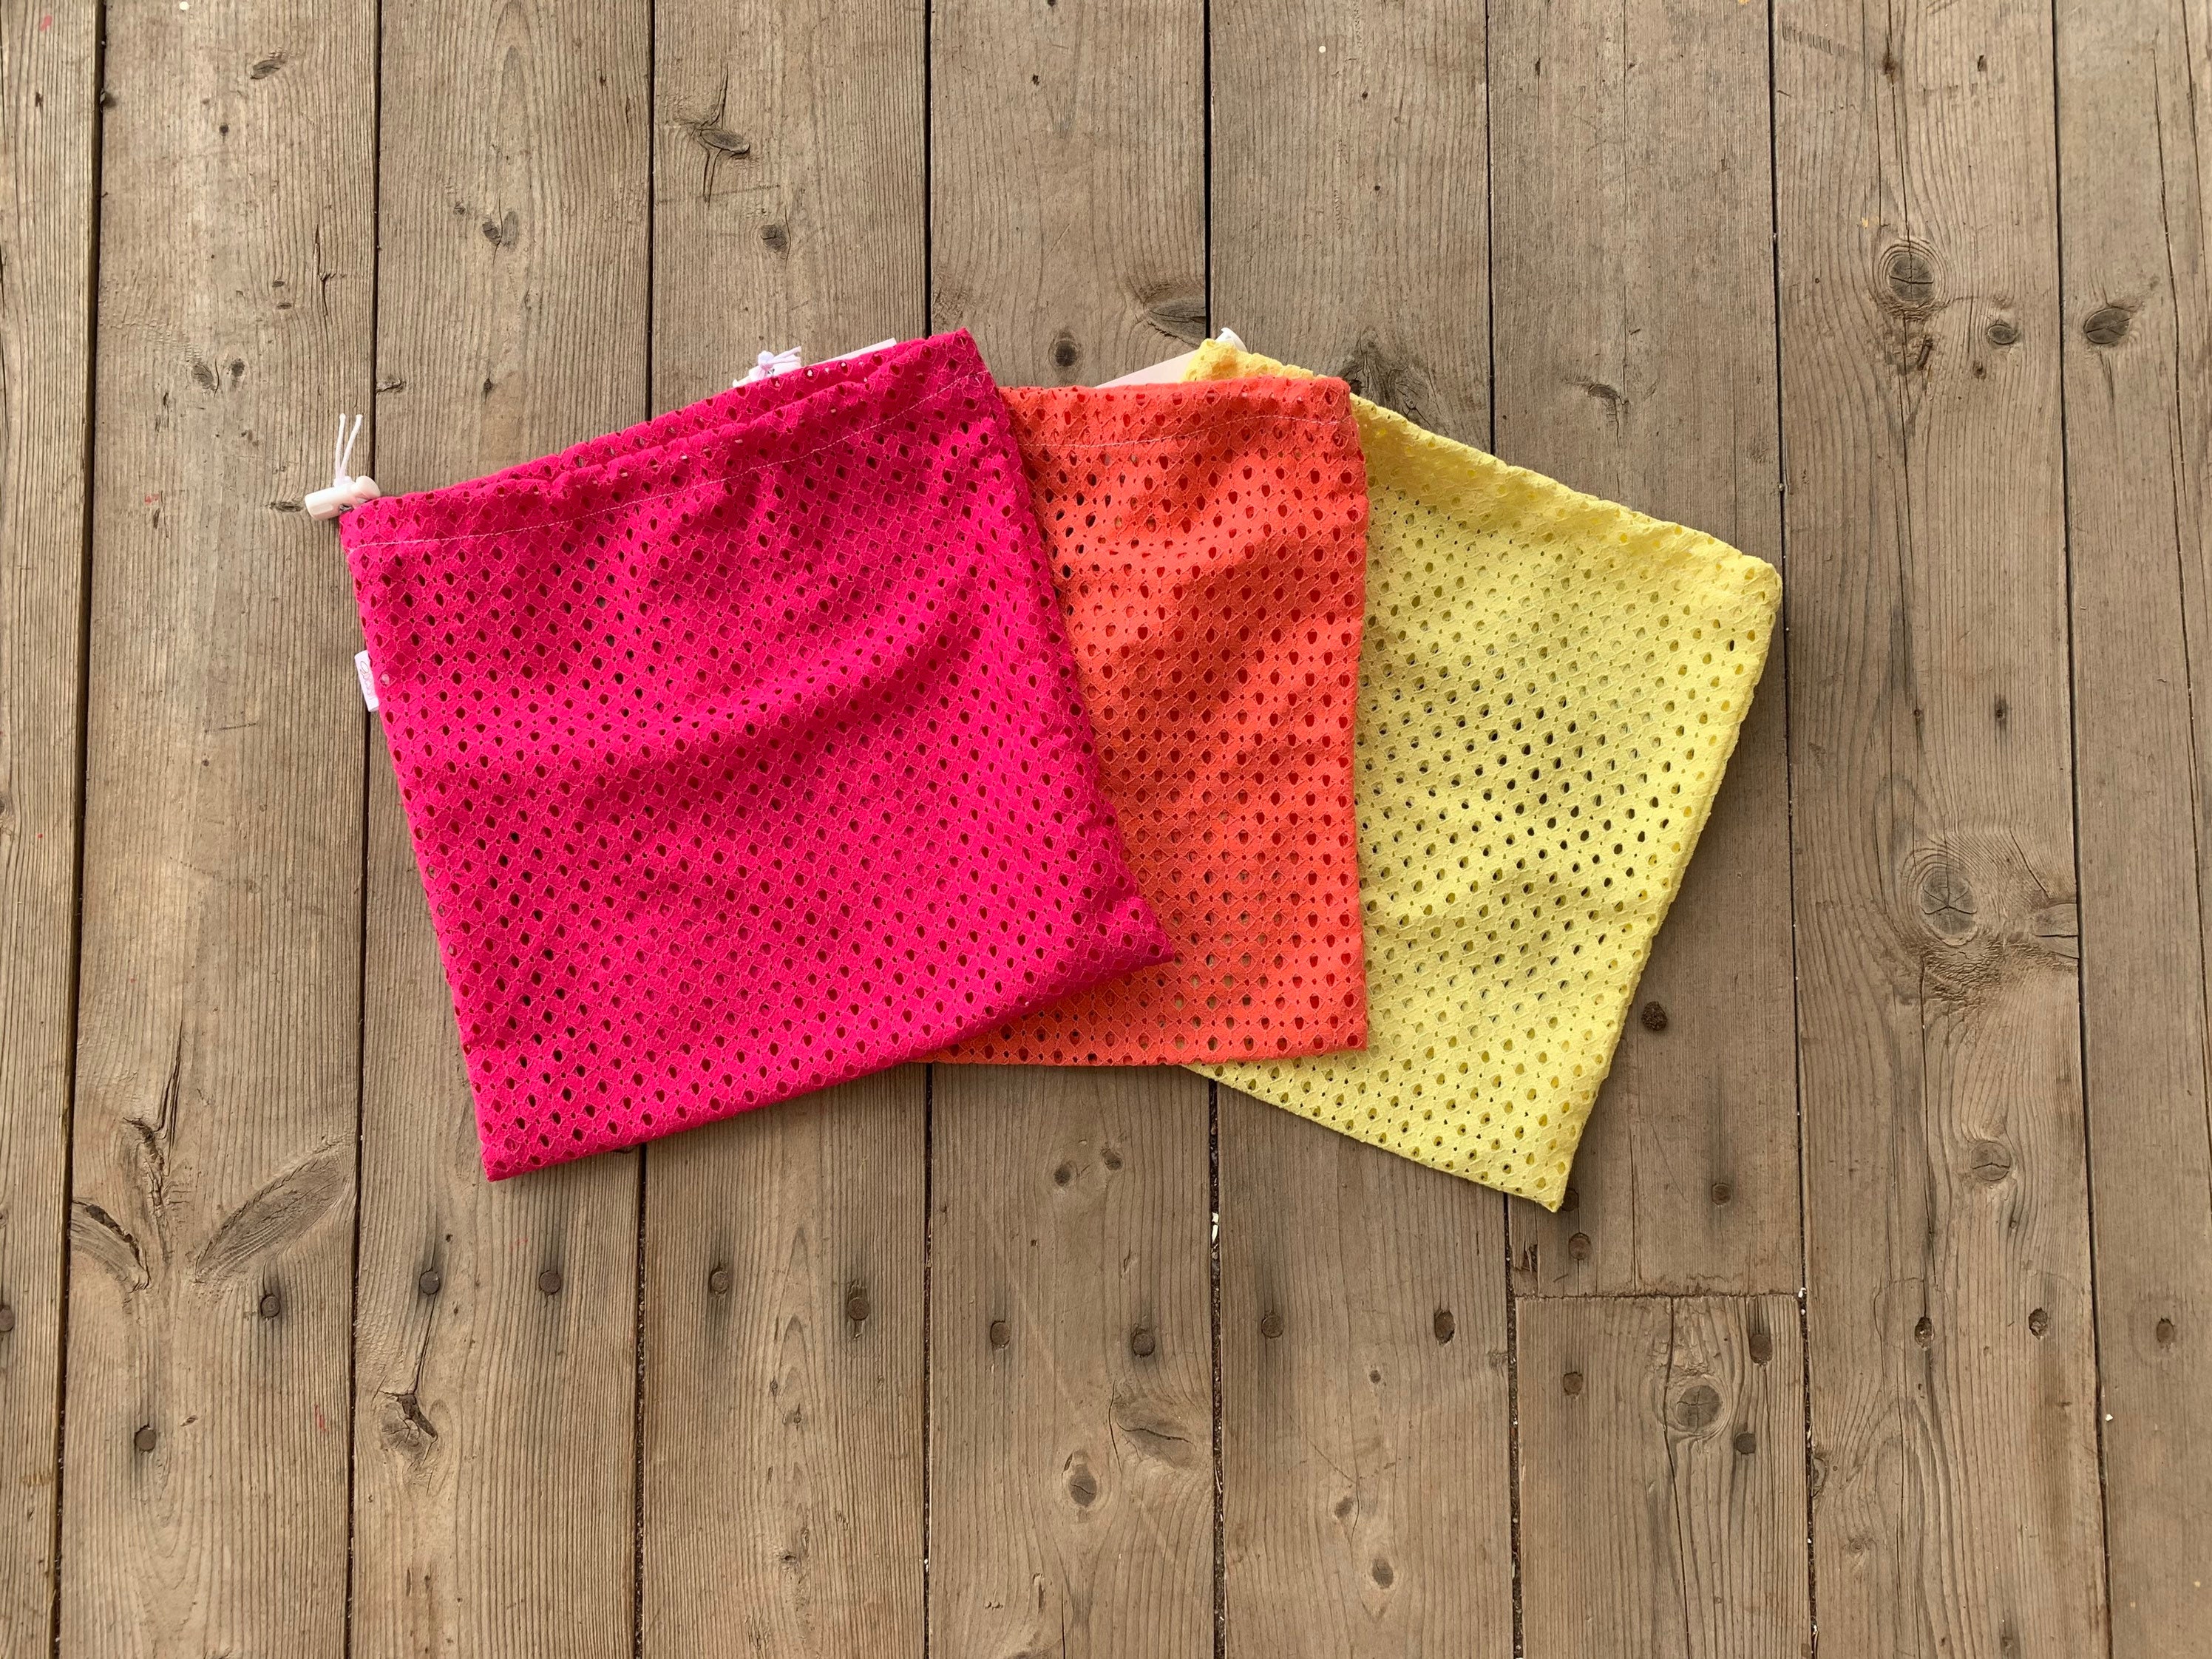 Linen Mesh Laundry Bag for Socks, Bra or Delicates. Lightweight Drawstring Wash  Bag. Washable Laundry Mesh Bags to Protect Your Clothing. 